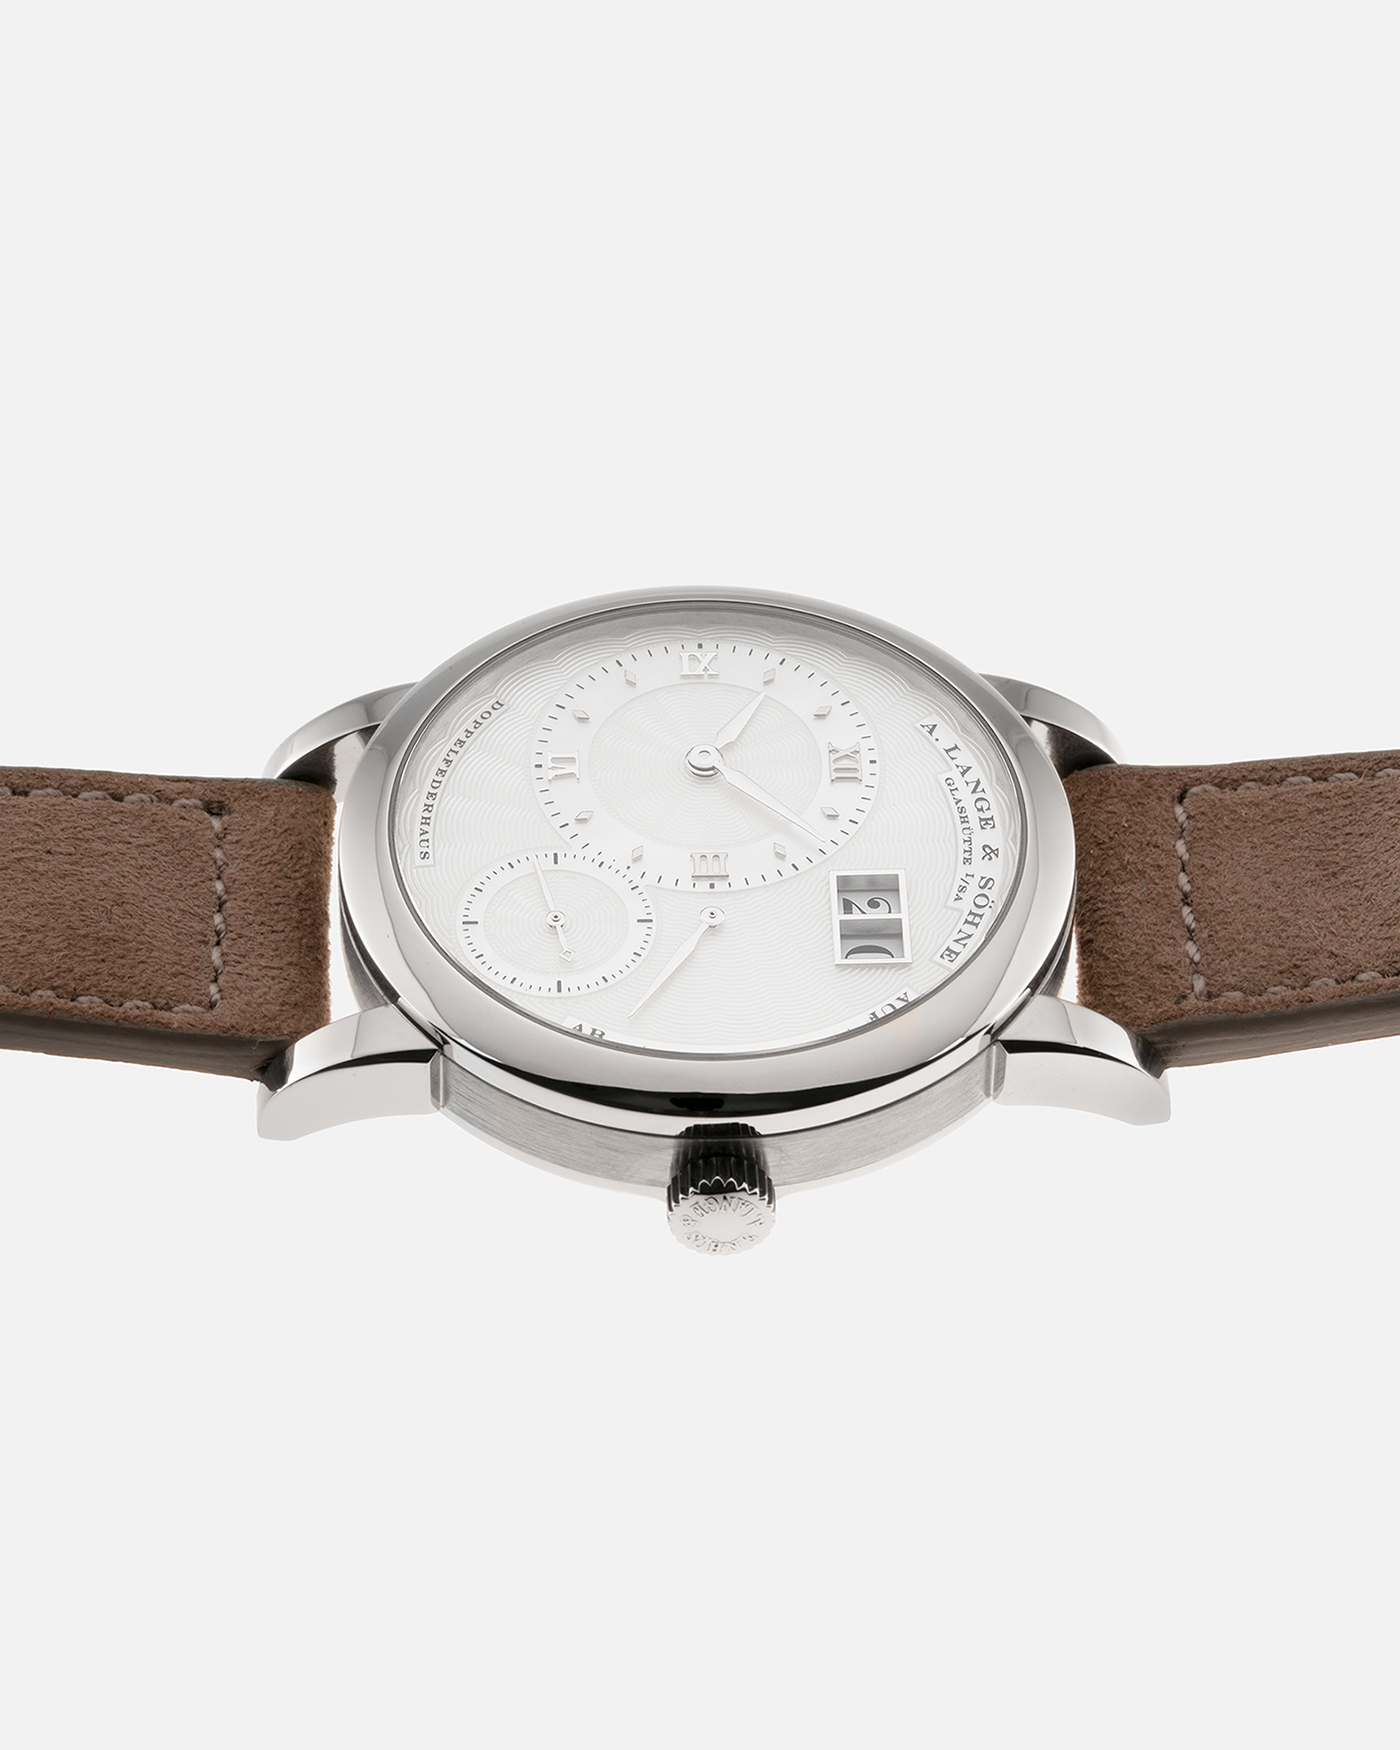 Brand: A. Lange & Sohne Year: 2000’s Model: Lange 1 Soiree Reference Number: 110.030 Material: 18k White Gold Movement: Manual Winding L901.5 Case Diameter: 38.5mm Bracelet/Strap: Molequin Taupe Suede with 18k White Gold Tang Buckle